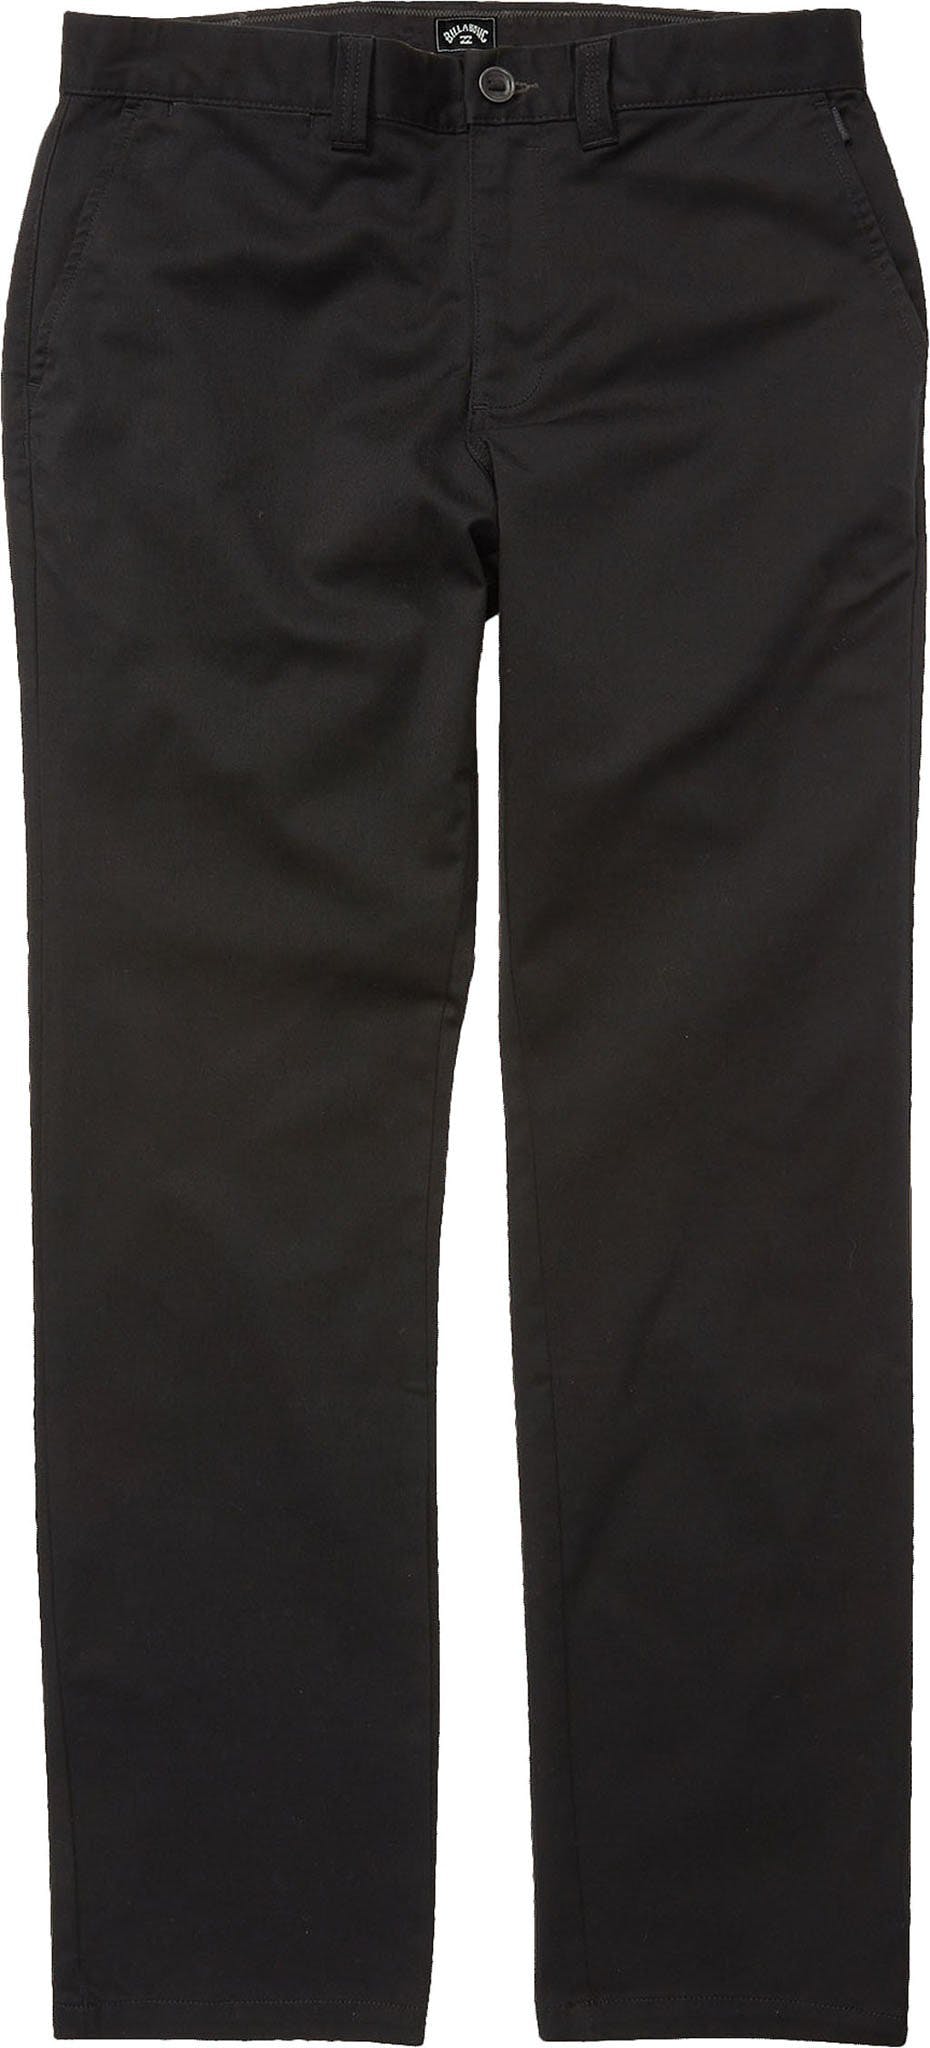 Product image for Carter Stretch Chino Pants - Boys